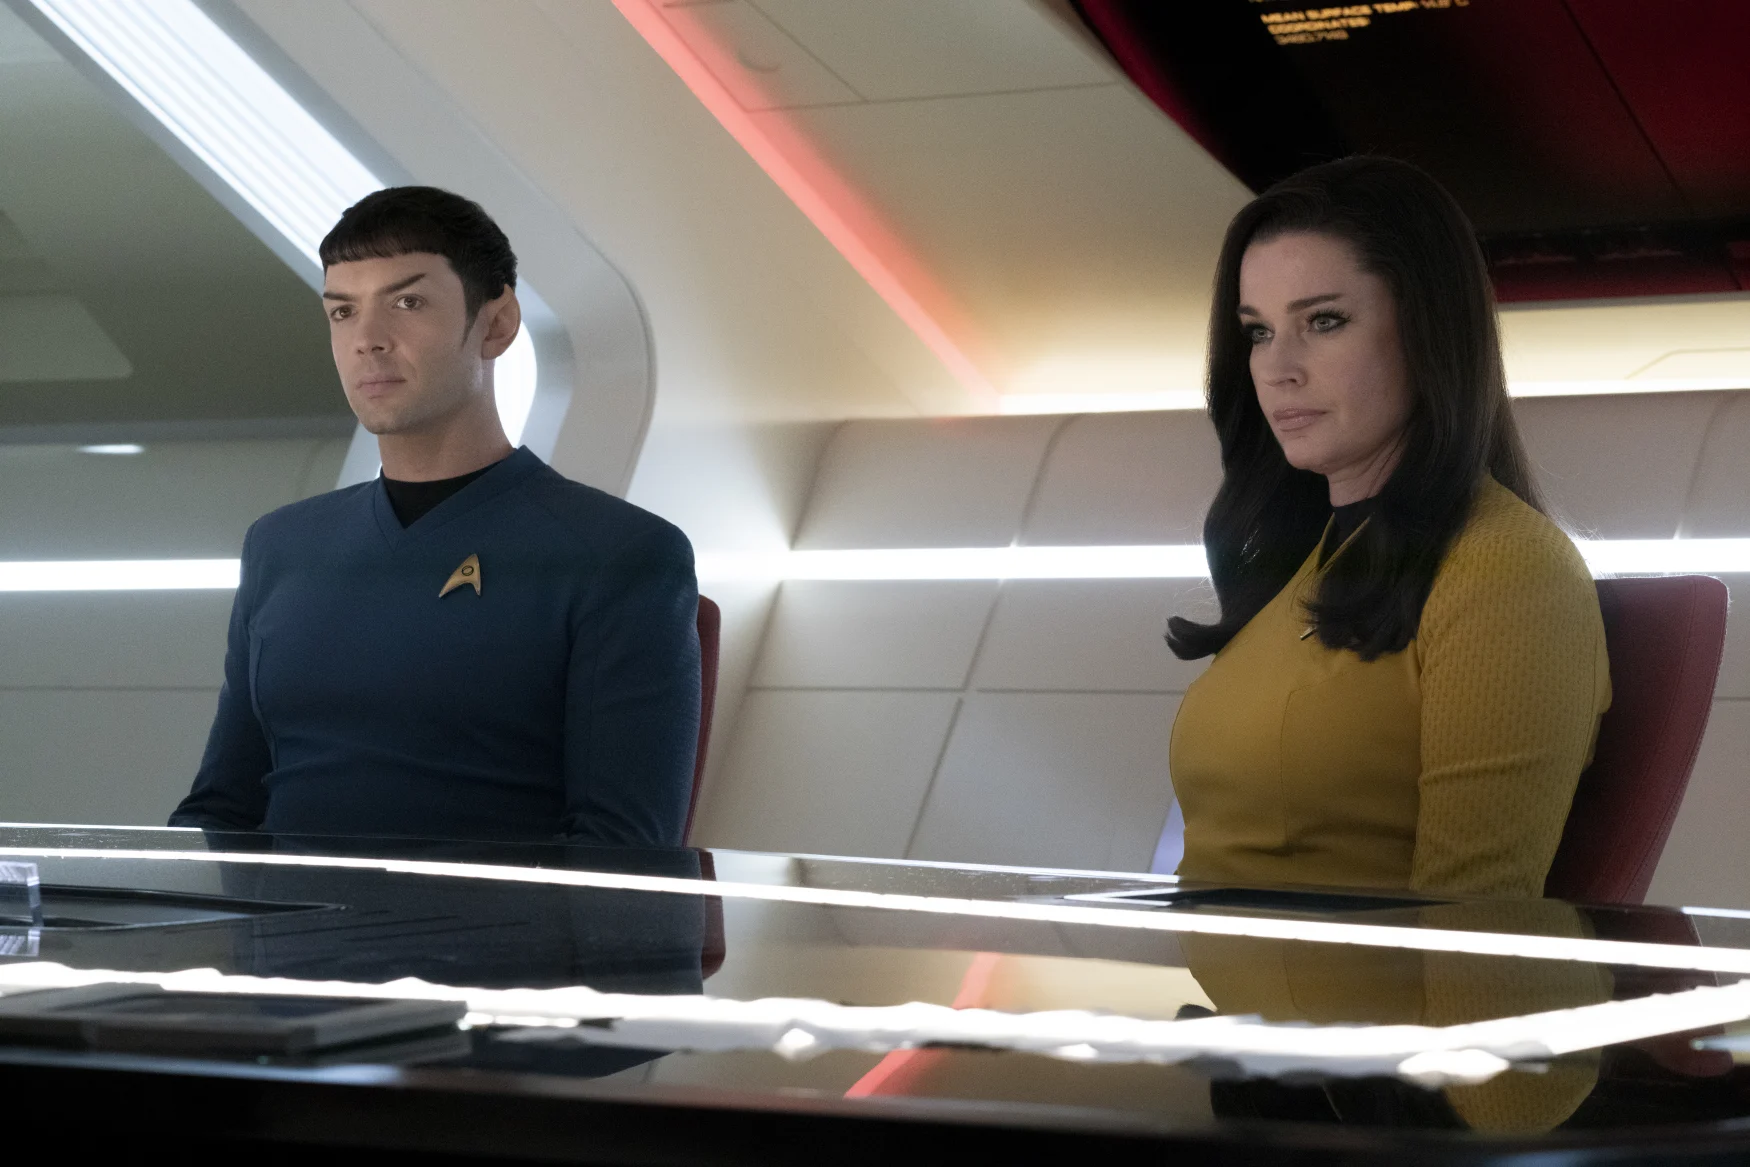 L-R Ethan Peck as Spock and Rebecca Romijn as Una in Star Trek: Strange New Worlds streaming on Paramount+, 2023. Photo Credit: Michael Gibson/Paramount+